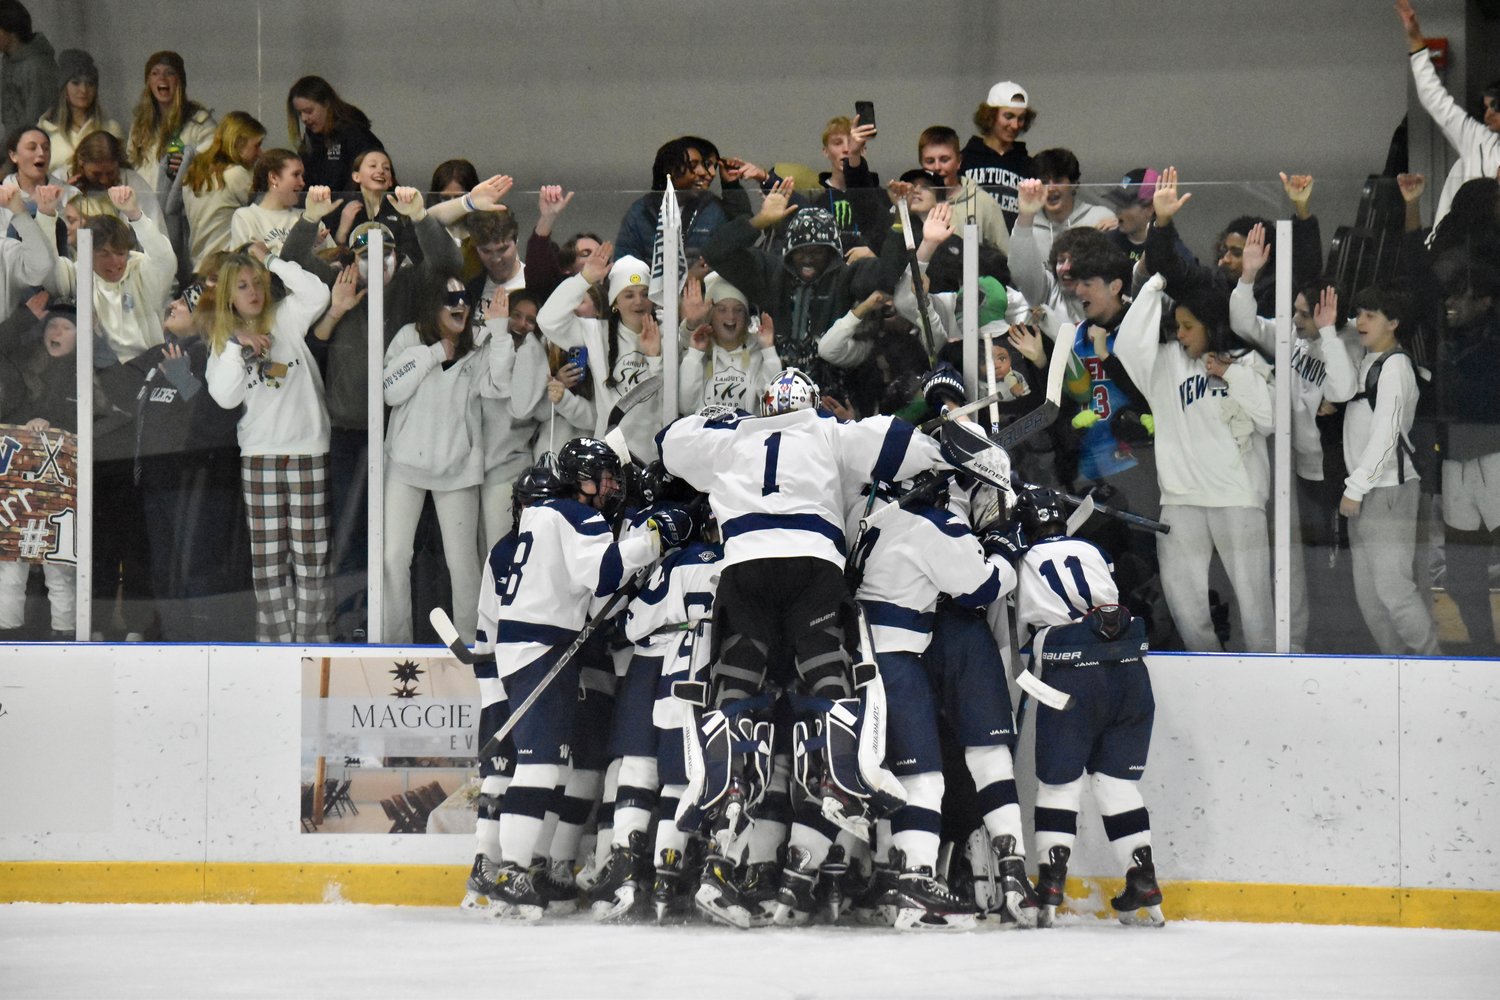 The Whalers celebrate in front of the student section after their 6-2 win Monday over Abington in the sweet 16.